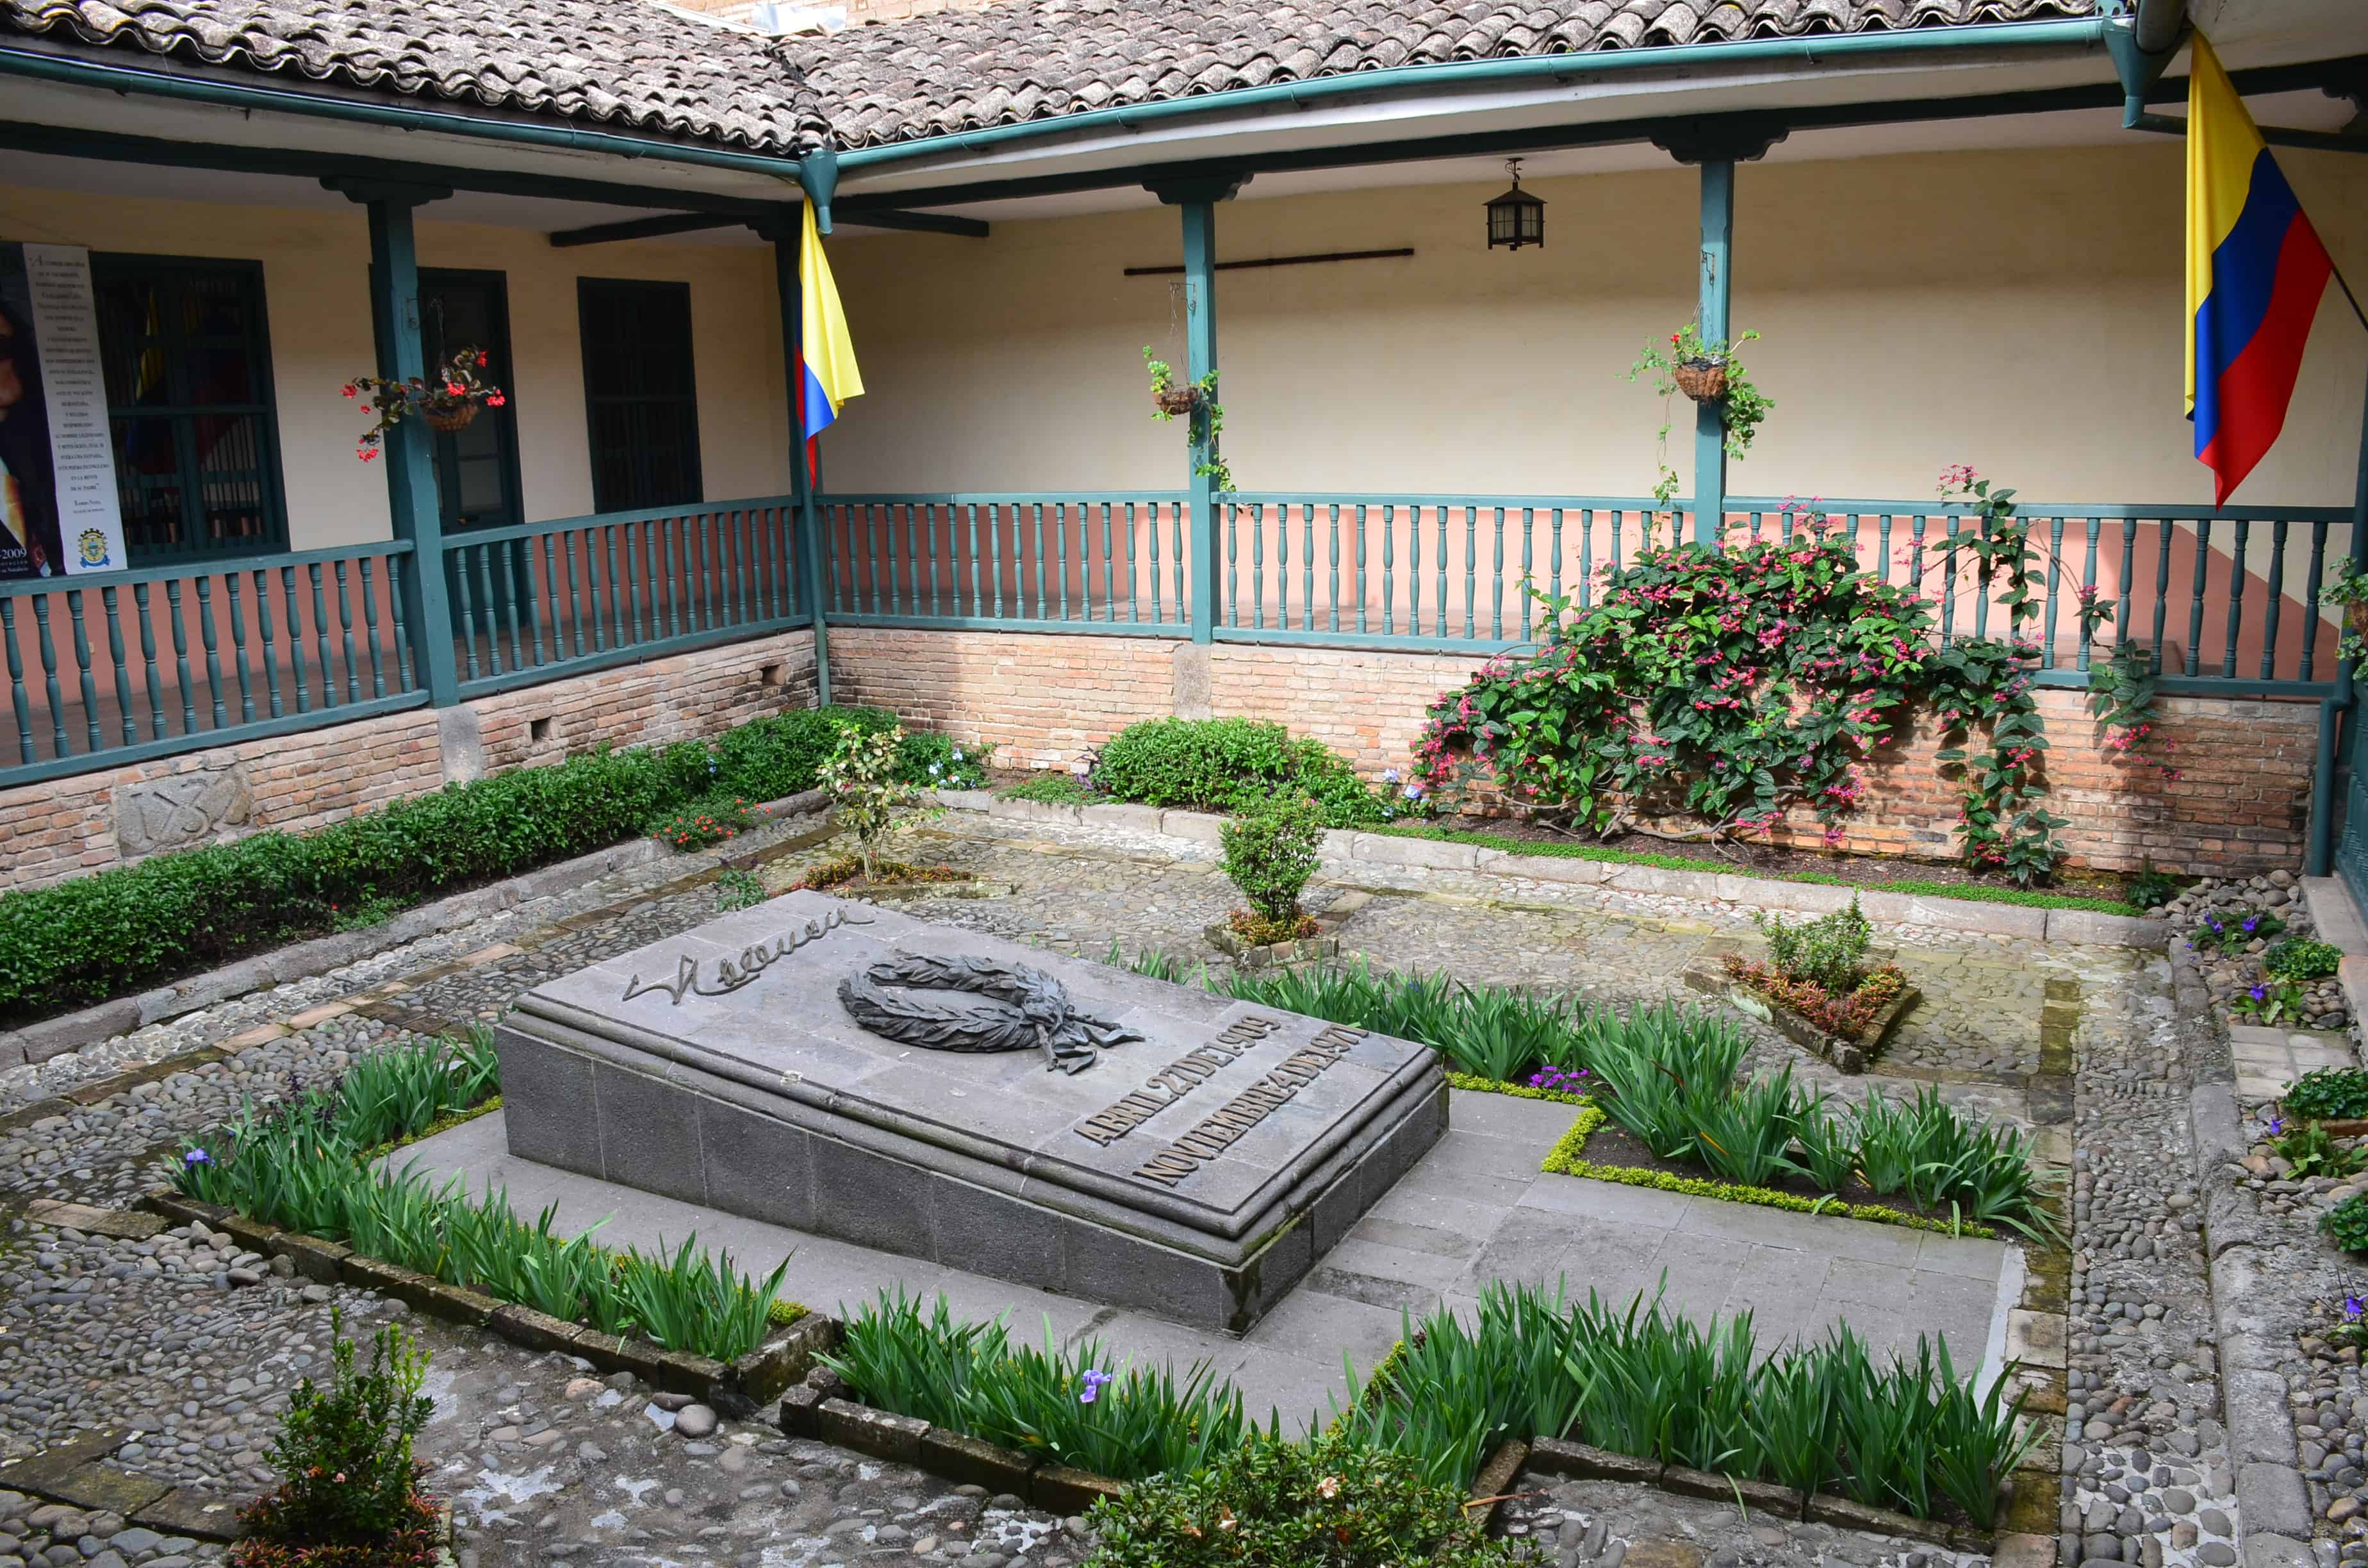 Tomb at the Guillermo León Valencia House Museum in Popayán, Cauca, Colombia